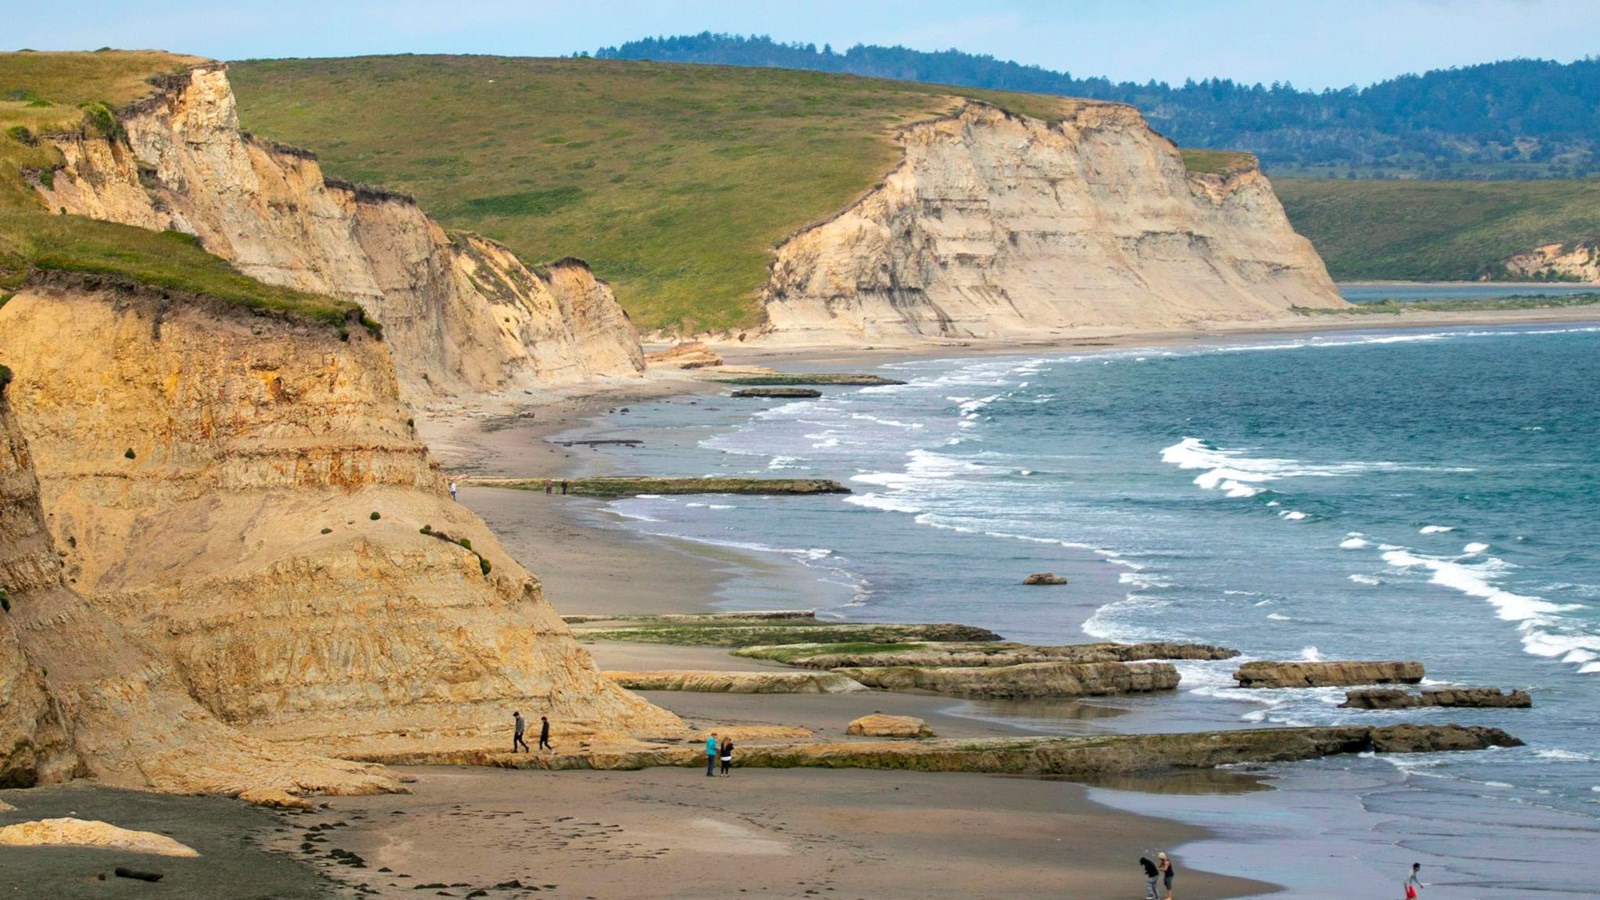 Beachgoers enjoy a sandy beach backed by sandstone cliffs as small waves wash in from the right..